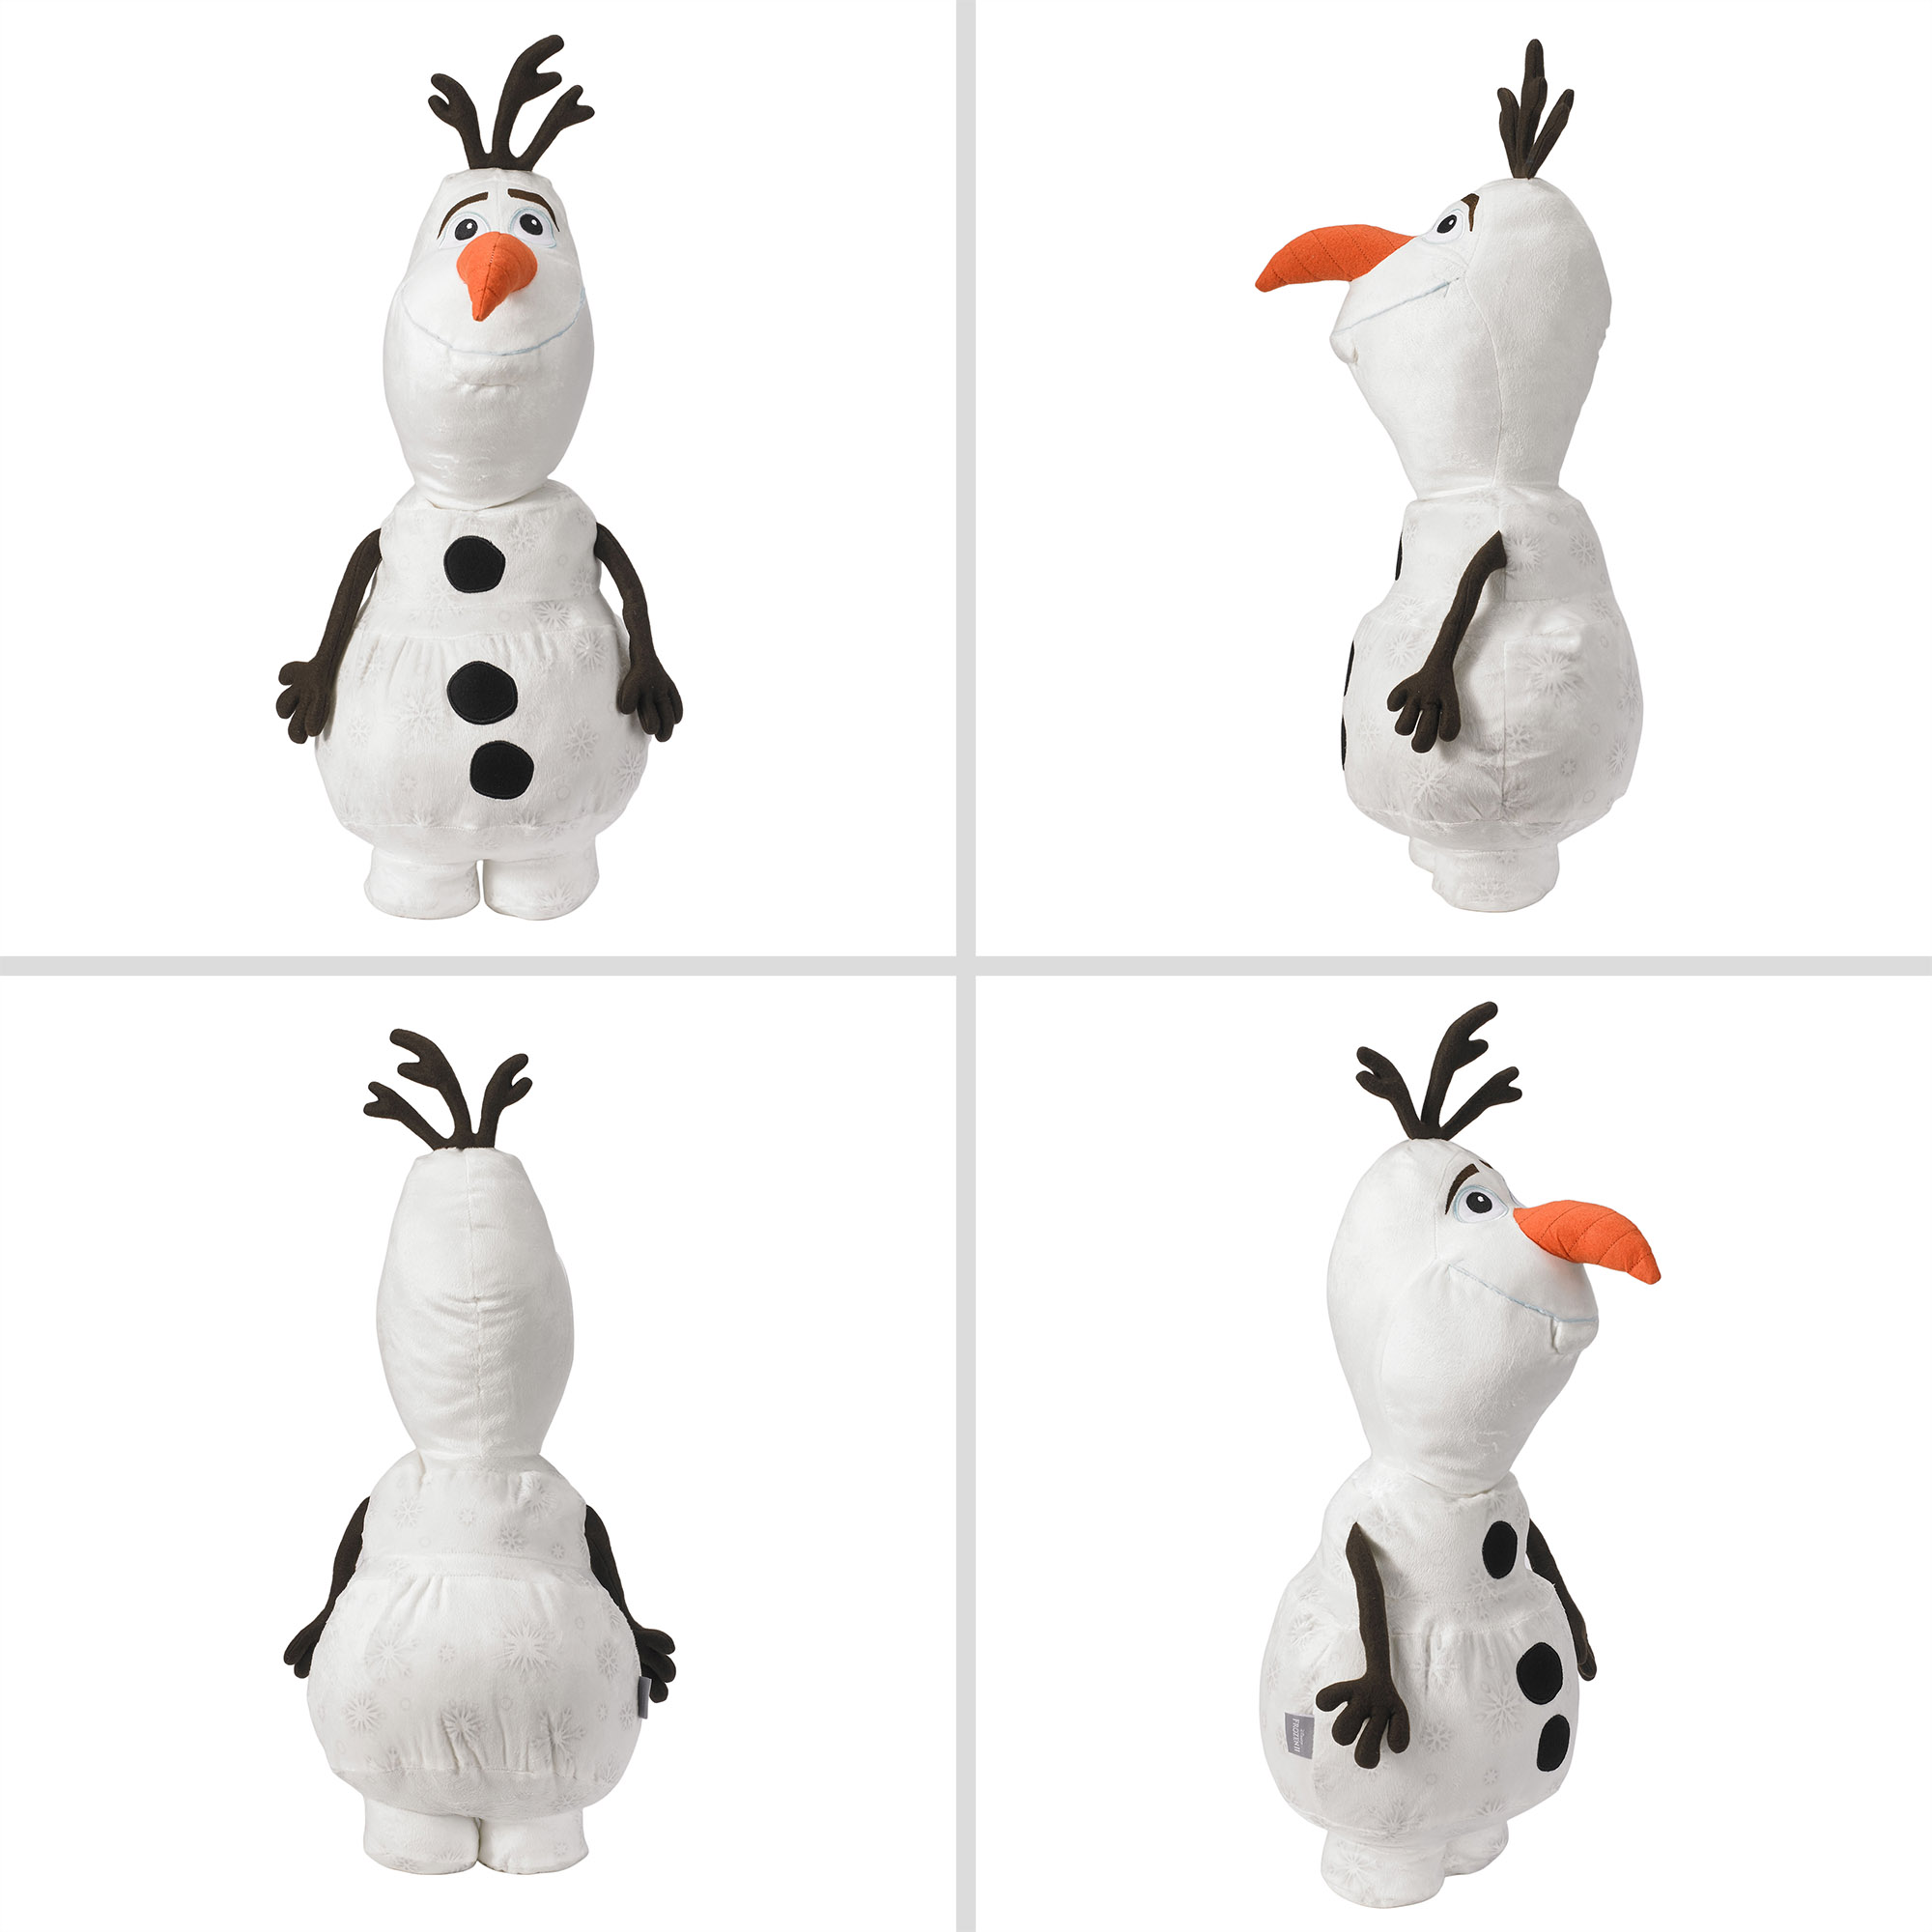 Disney Frozen Kids Olaf Bedding Plush Cuddle and Decorative Pillow Buddy, White - image 5 of 7